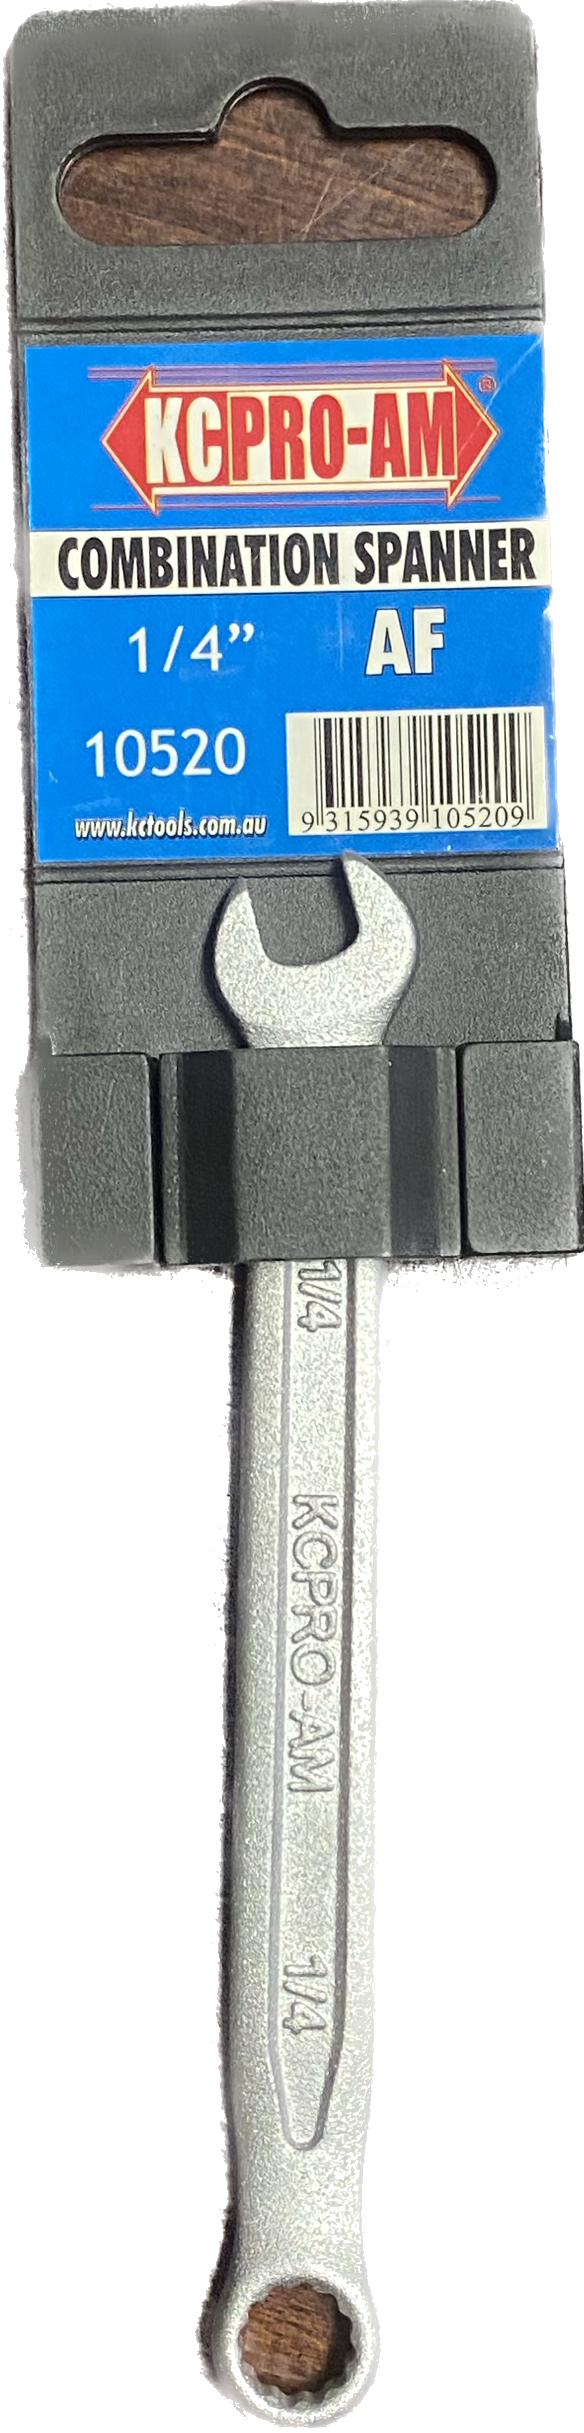 1/4" Combination Spanner